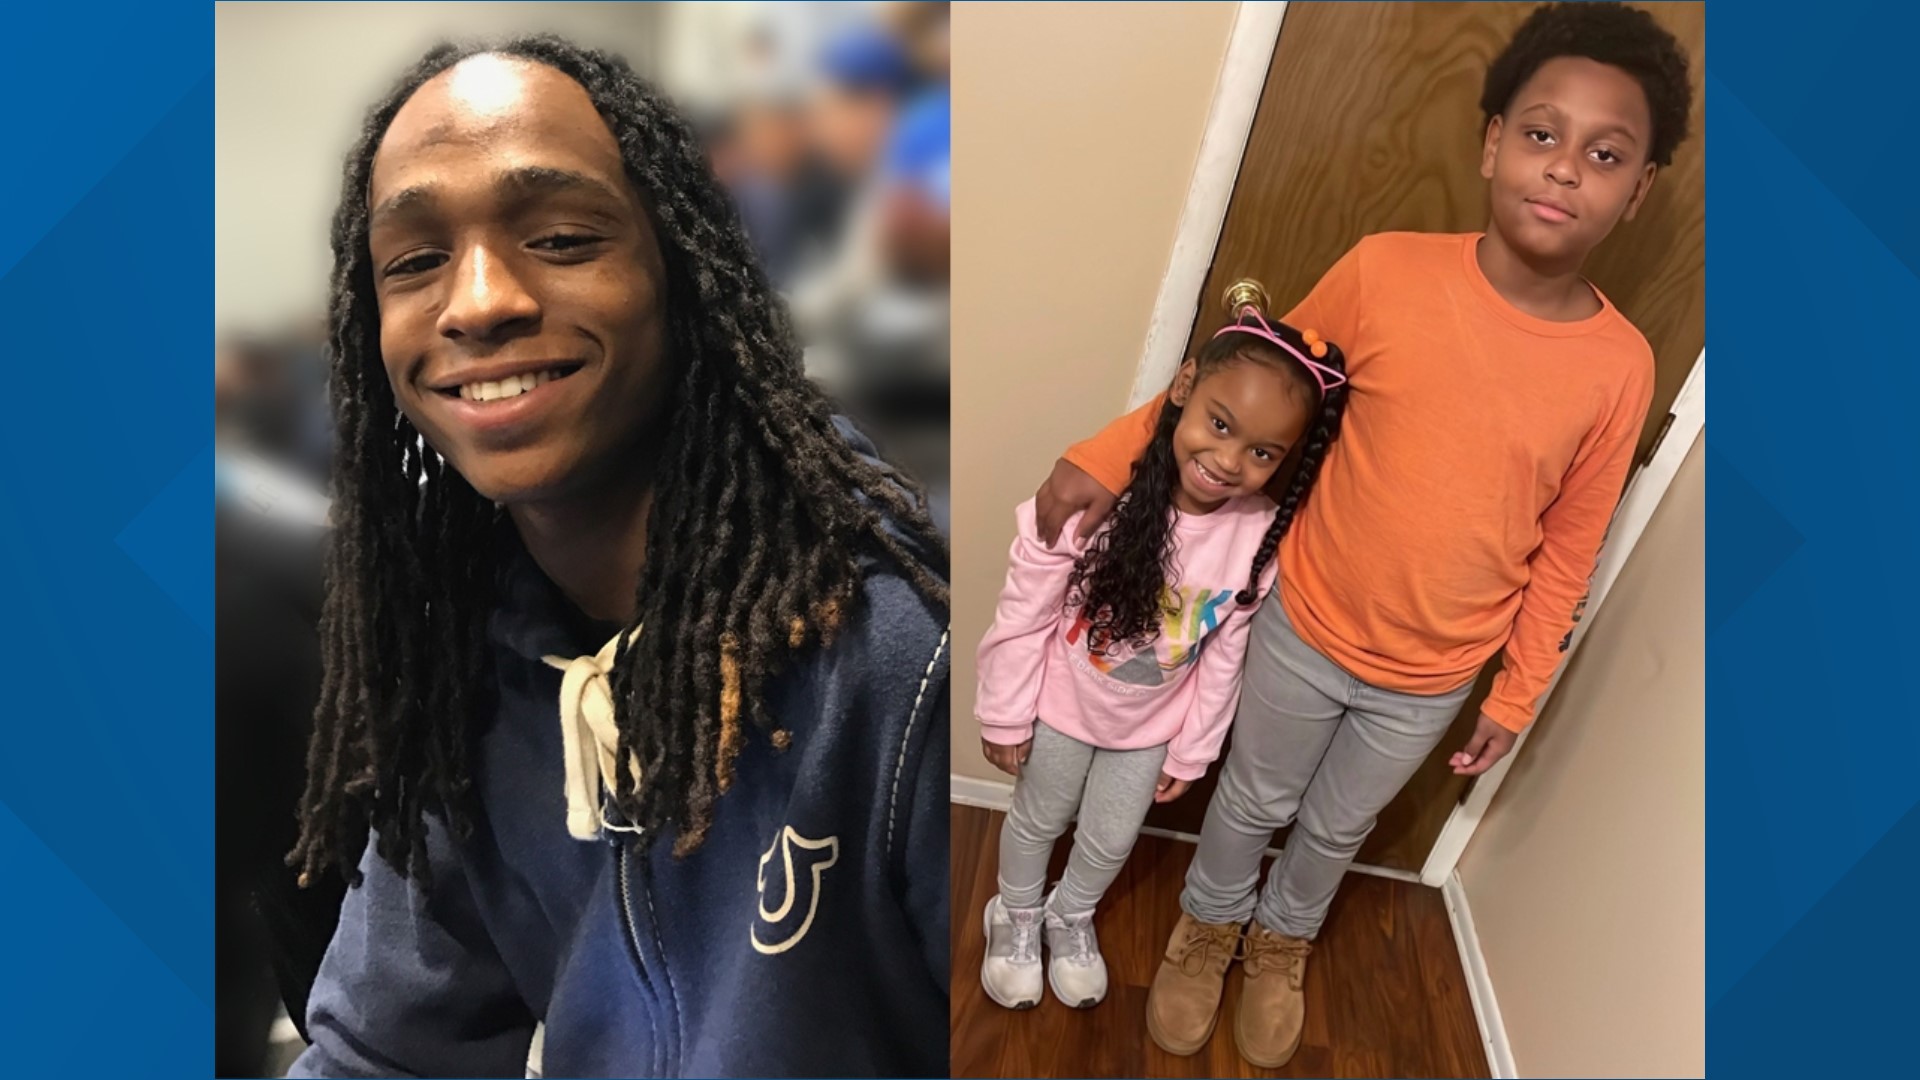 A reward is now being offered in the Dec. 7, 2021 shooting deaths of Charles Wade and his girlfriend's two children Demitrius Wall-Neal and Londynn Wall-Neal.